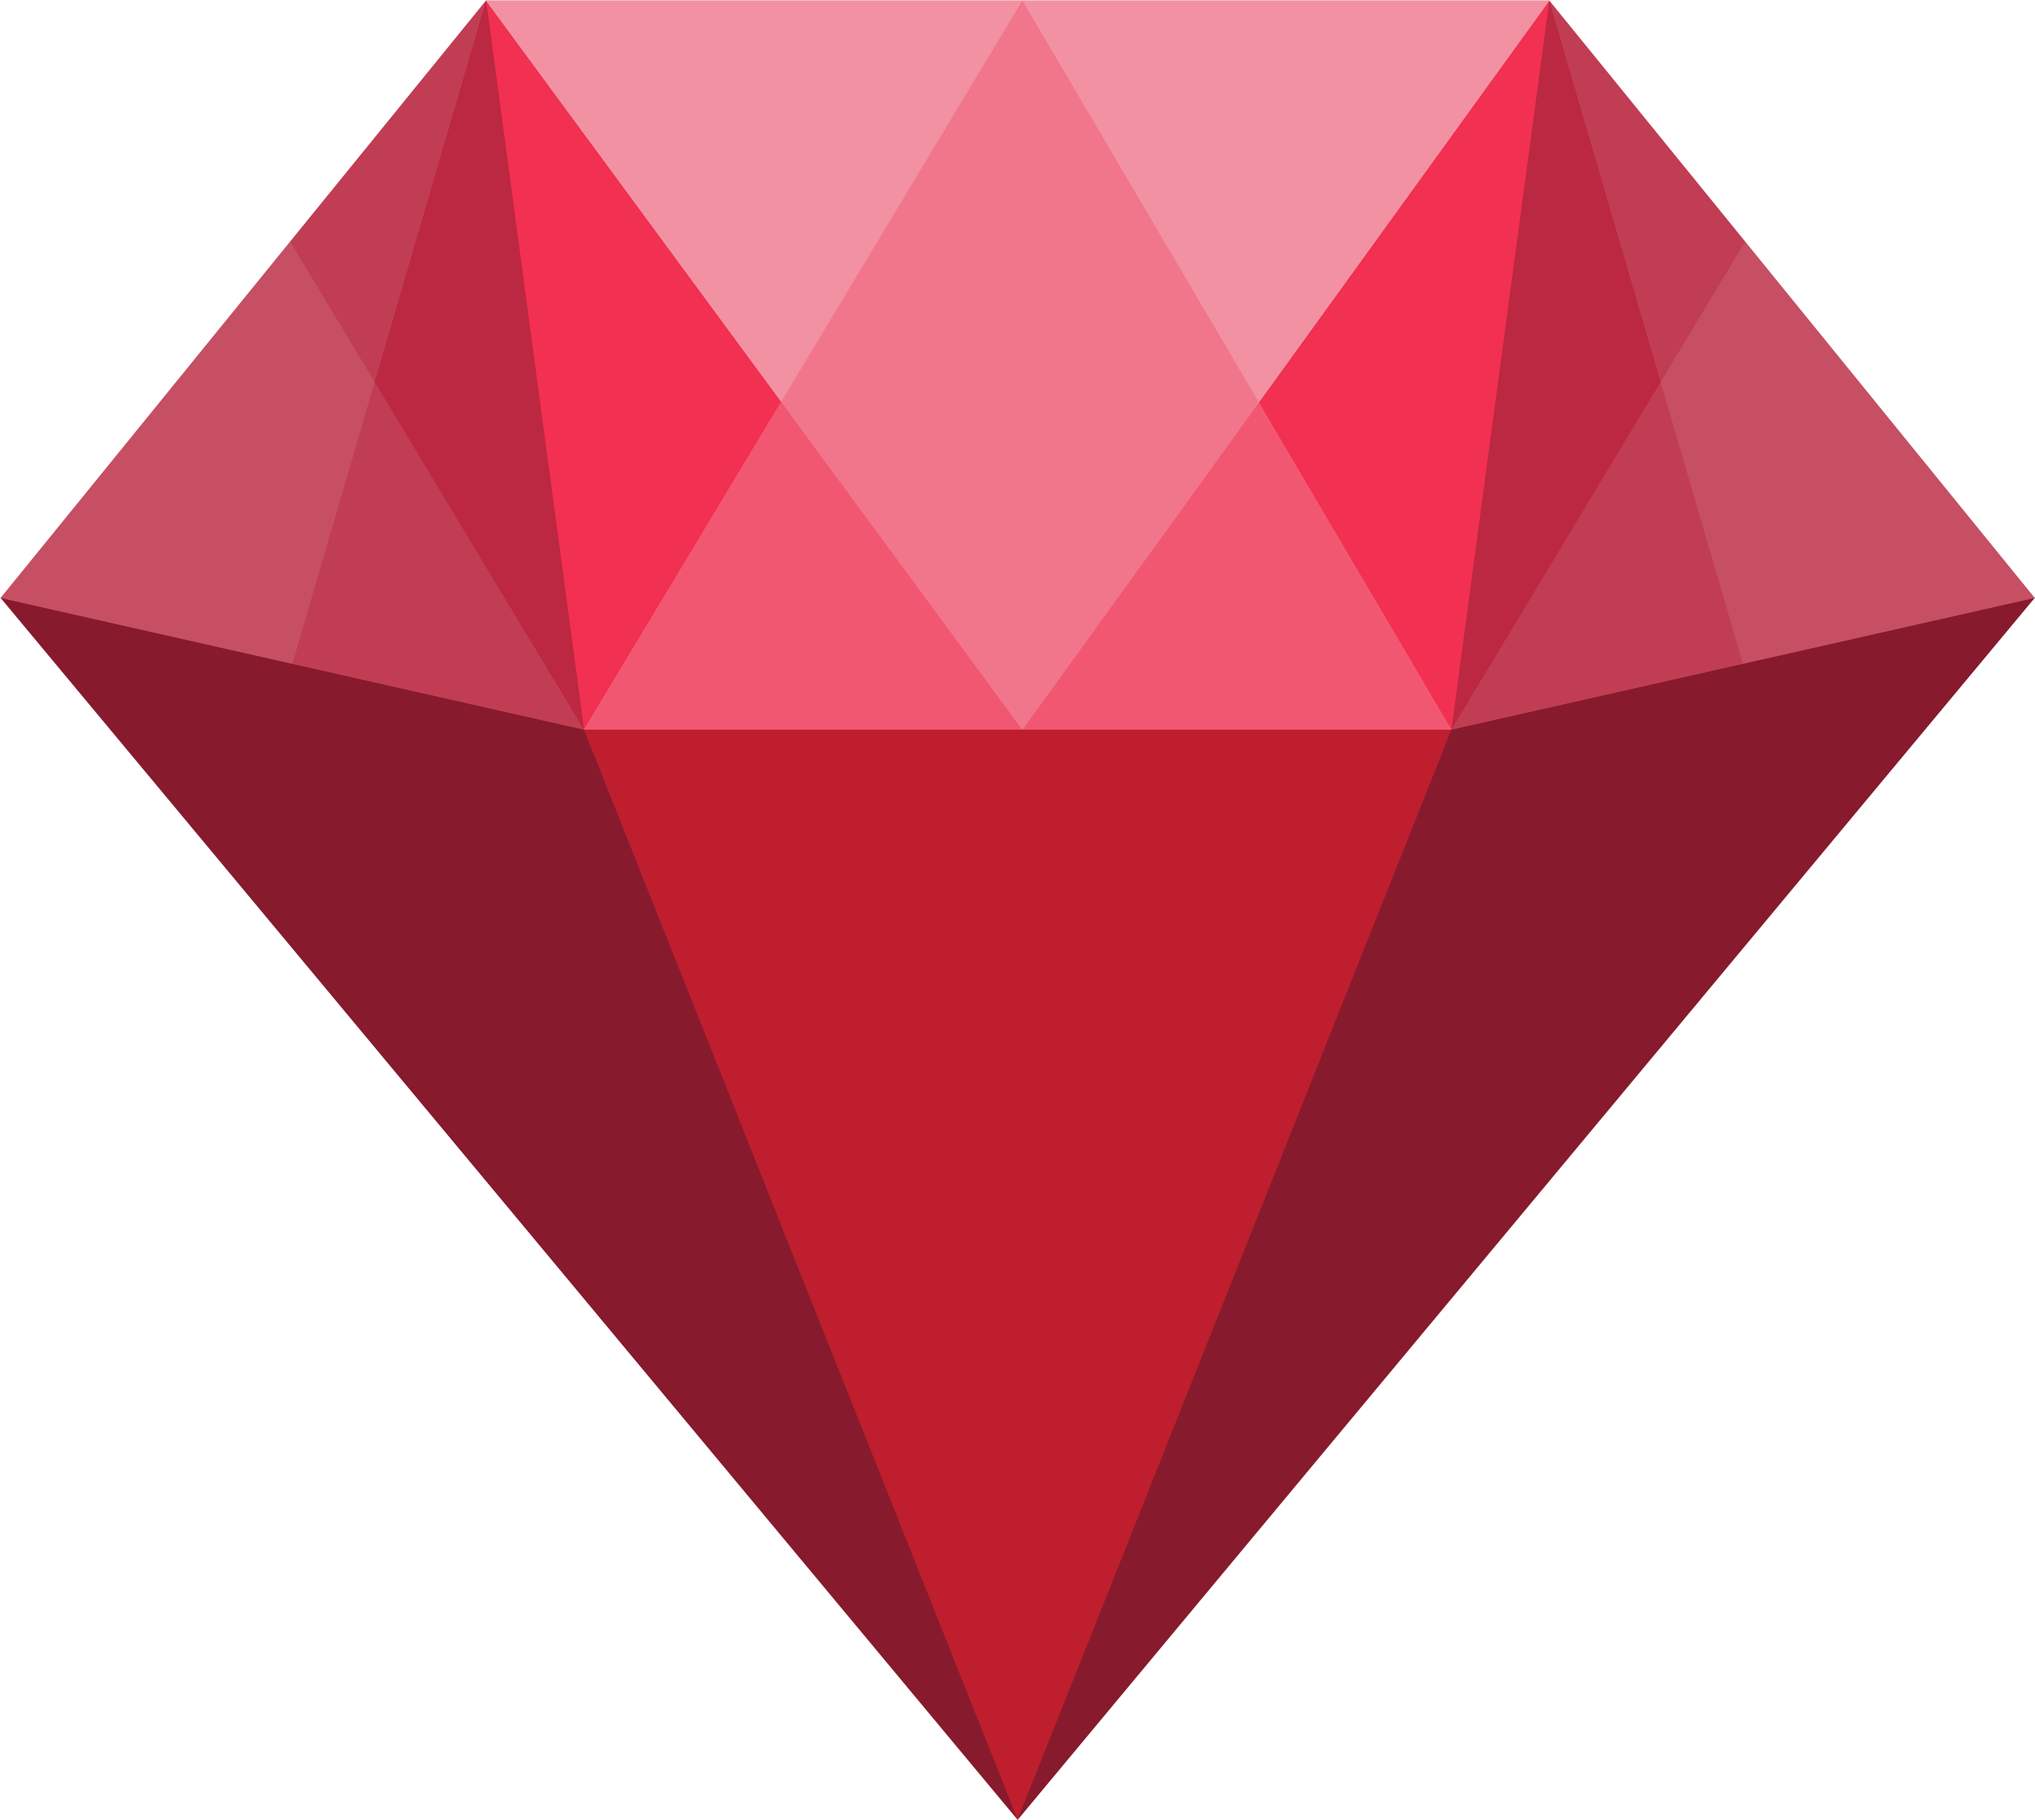 A Red Diamond With Black Background